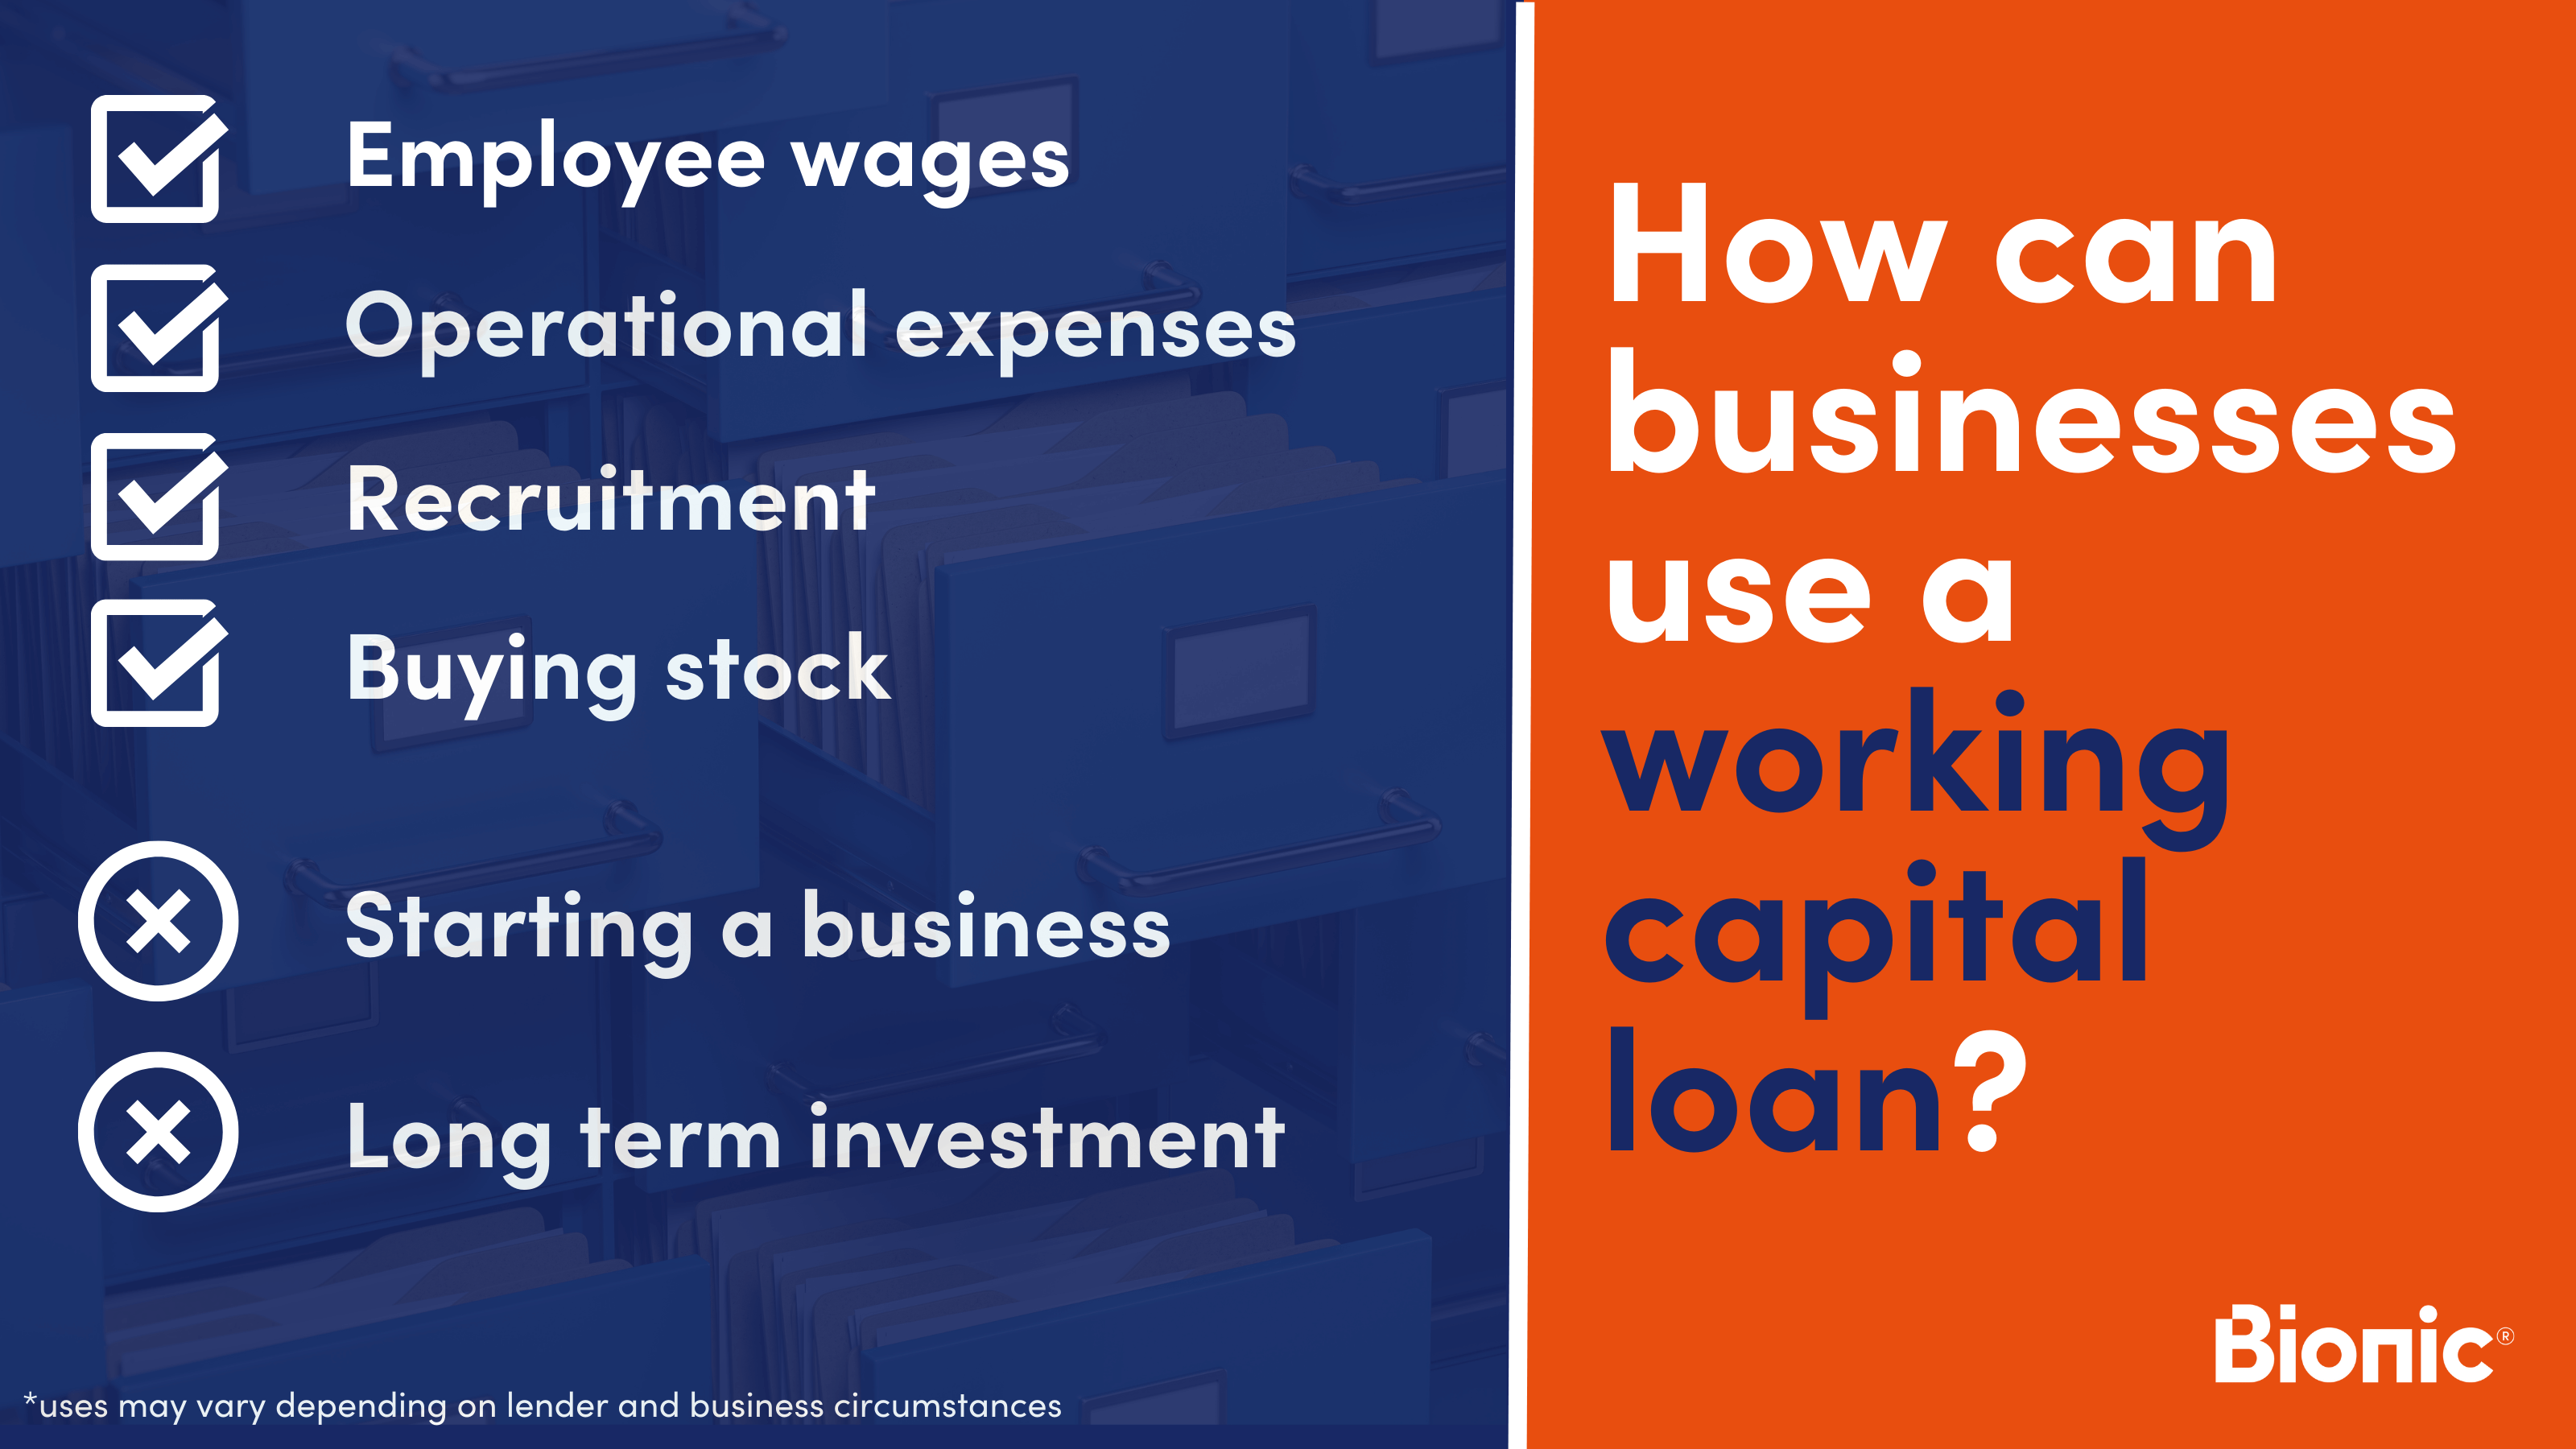 How can businesses use a working capital loan infographic